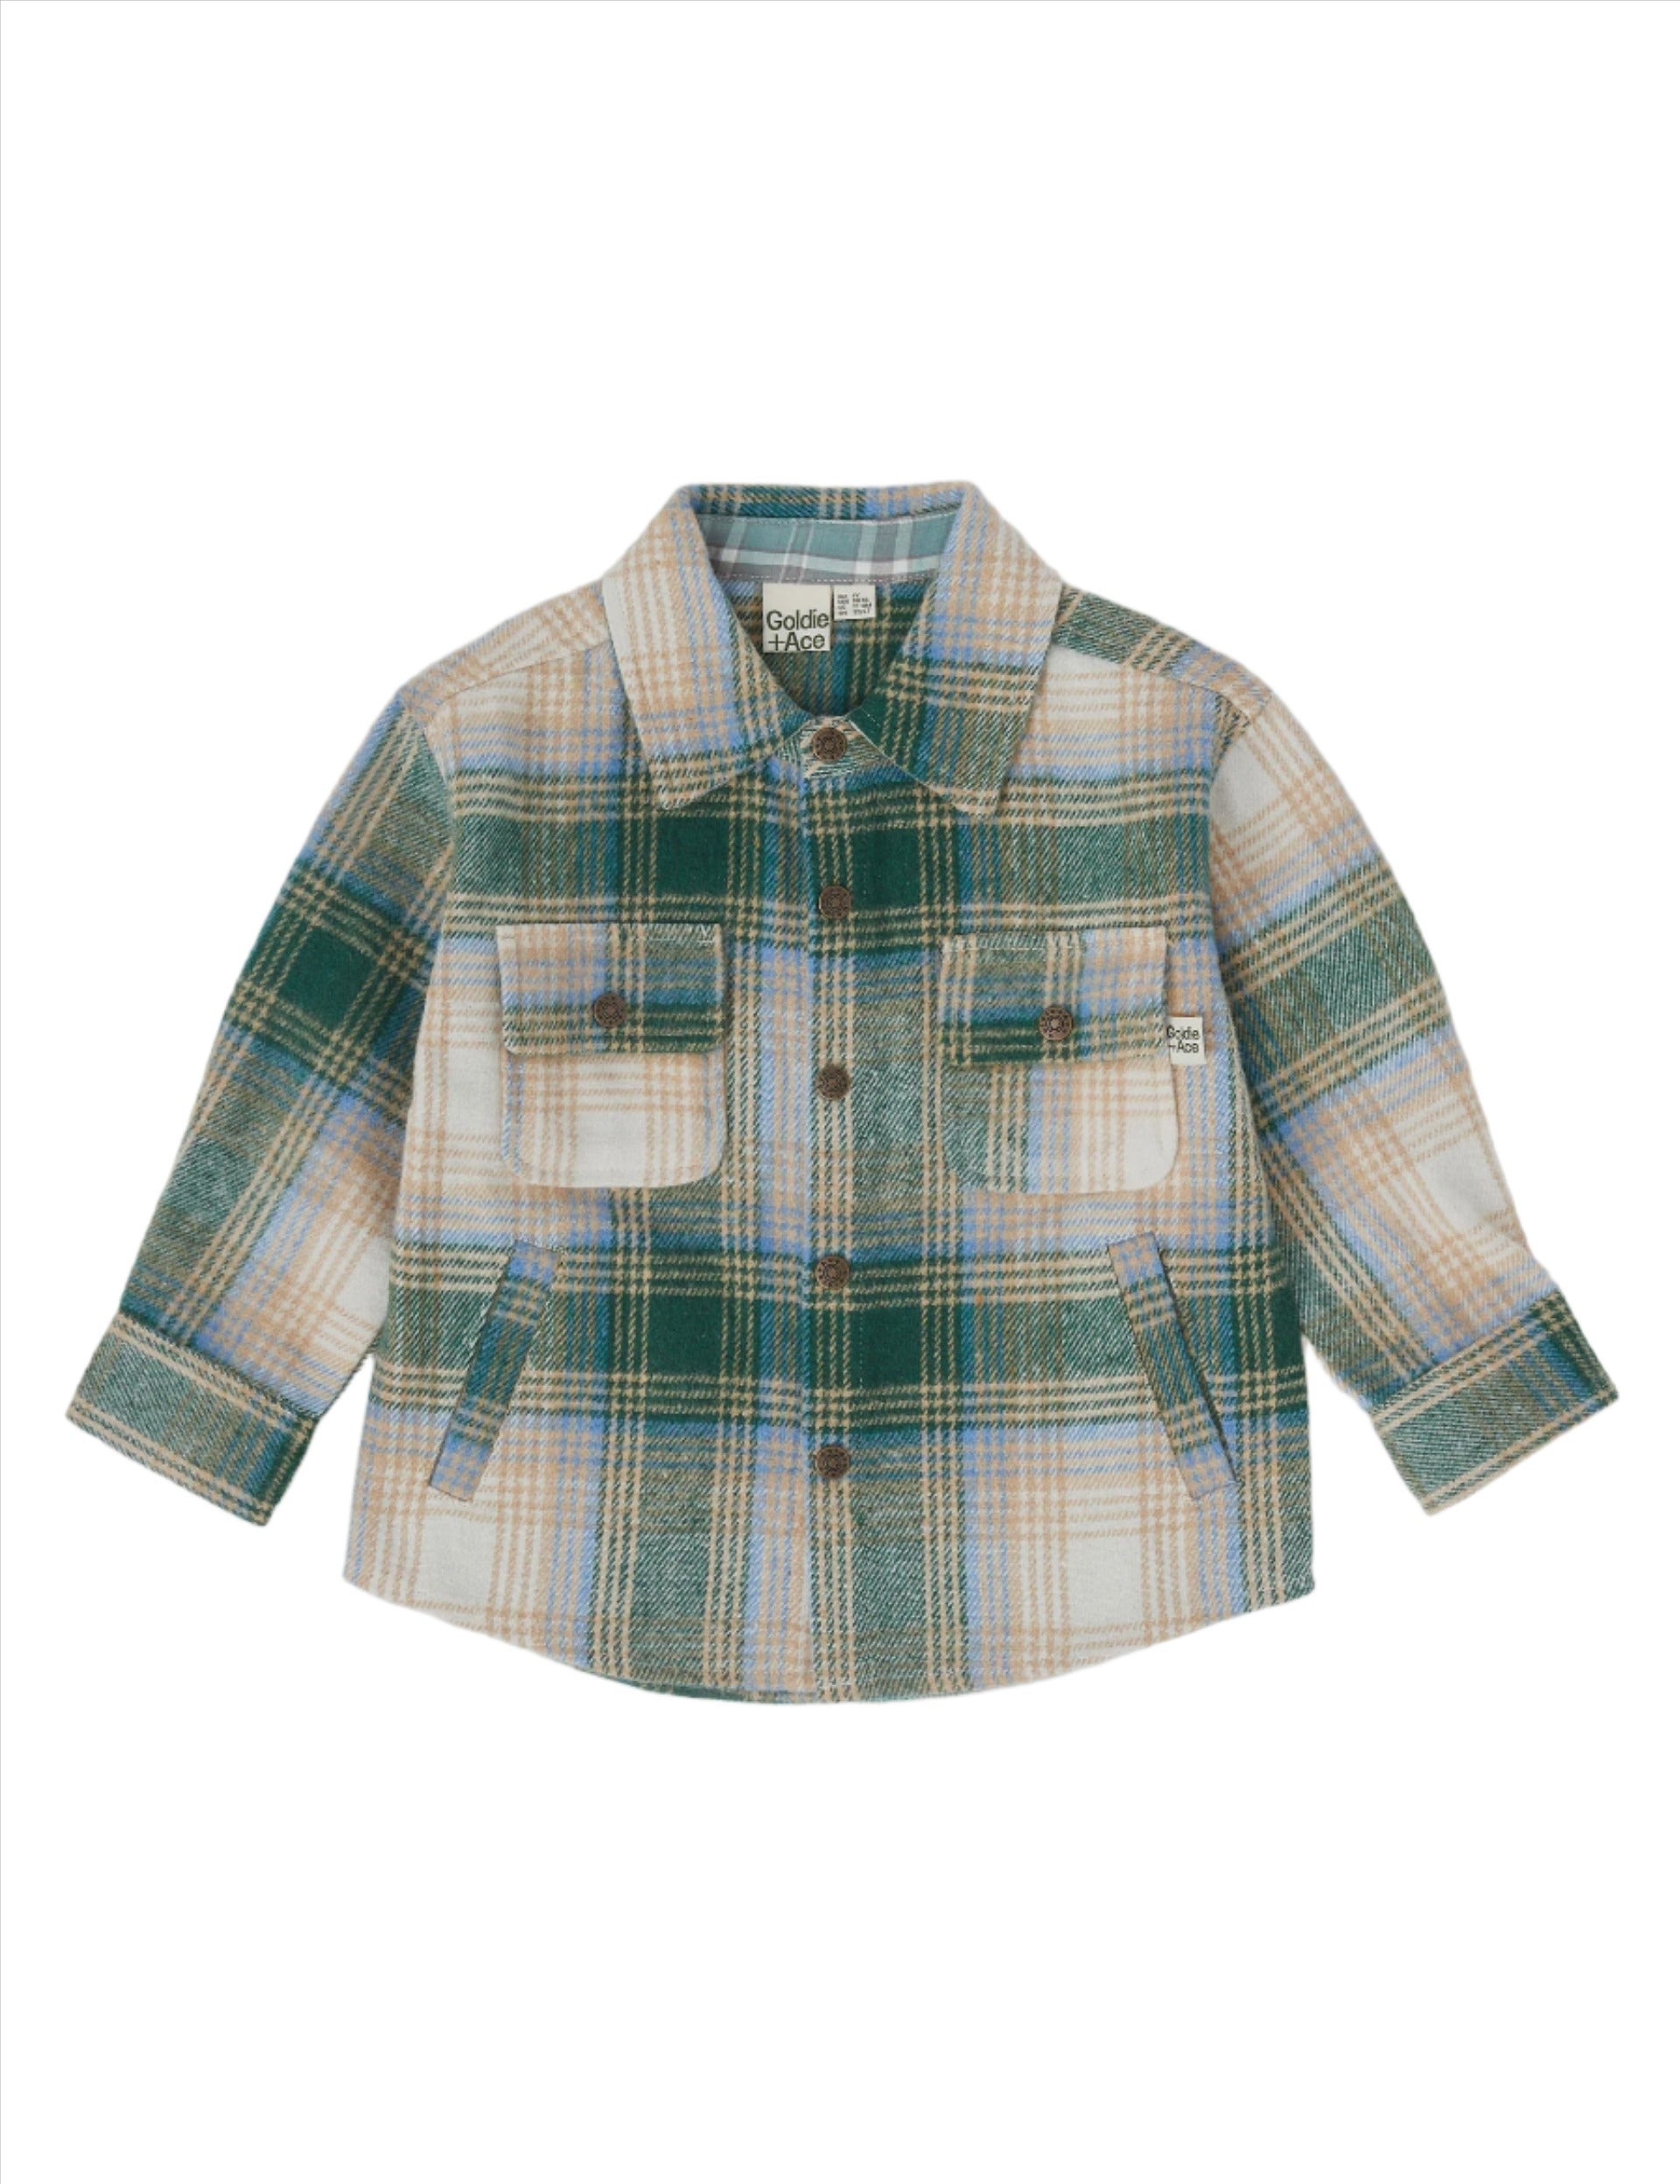 ROWAN CHECK SHIRT ALPINE/OAT | Goldie and Ace